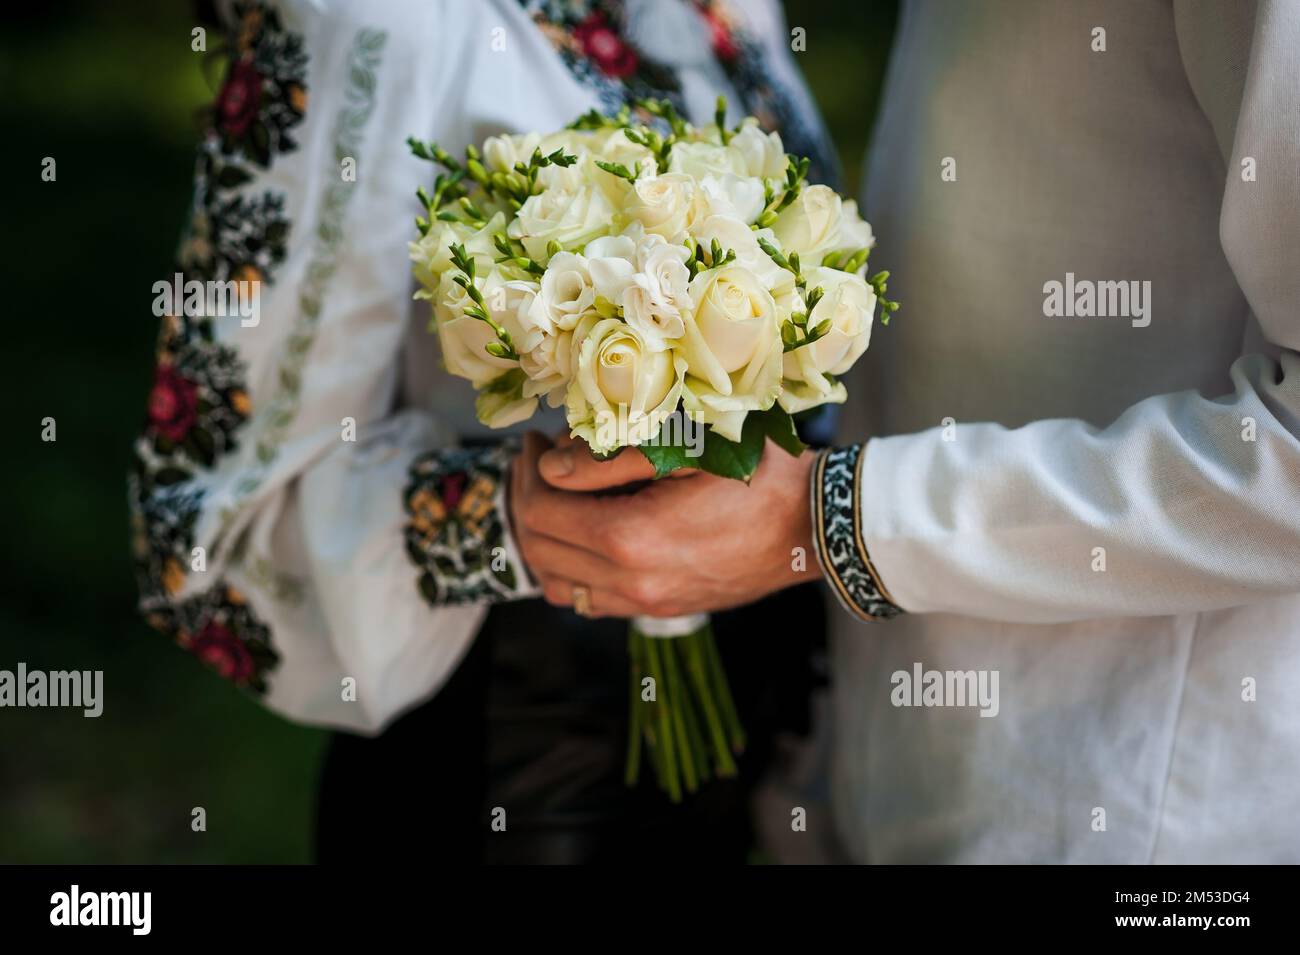 A bouquet of flowers in the hands of the bride. A bouquet of white flowers in the hands of a woman Stock Photo